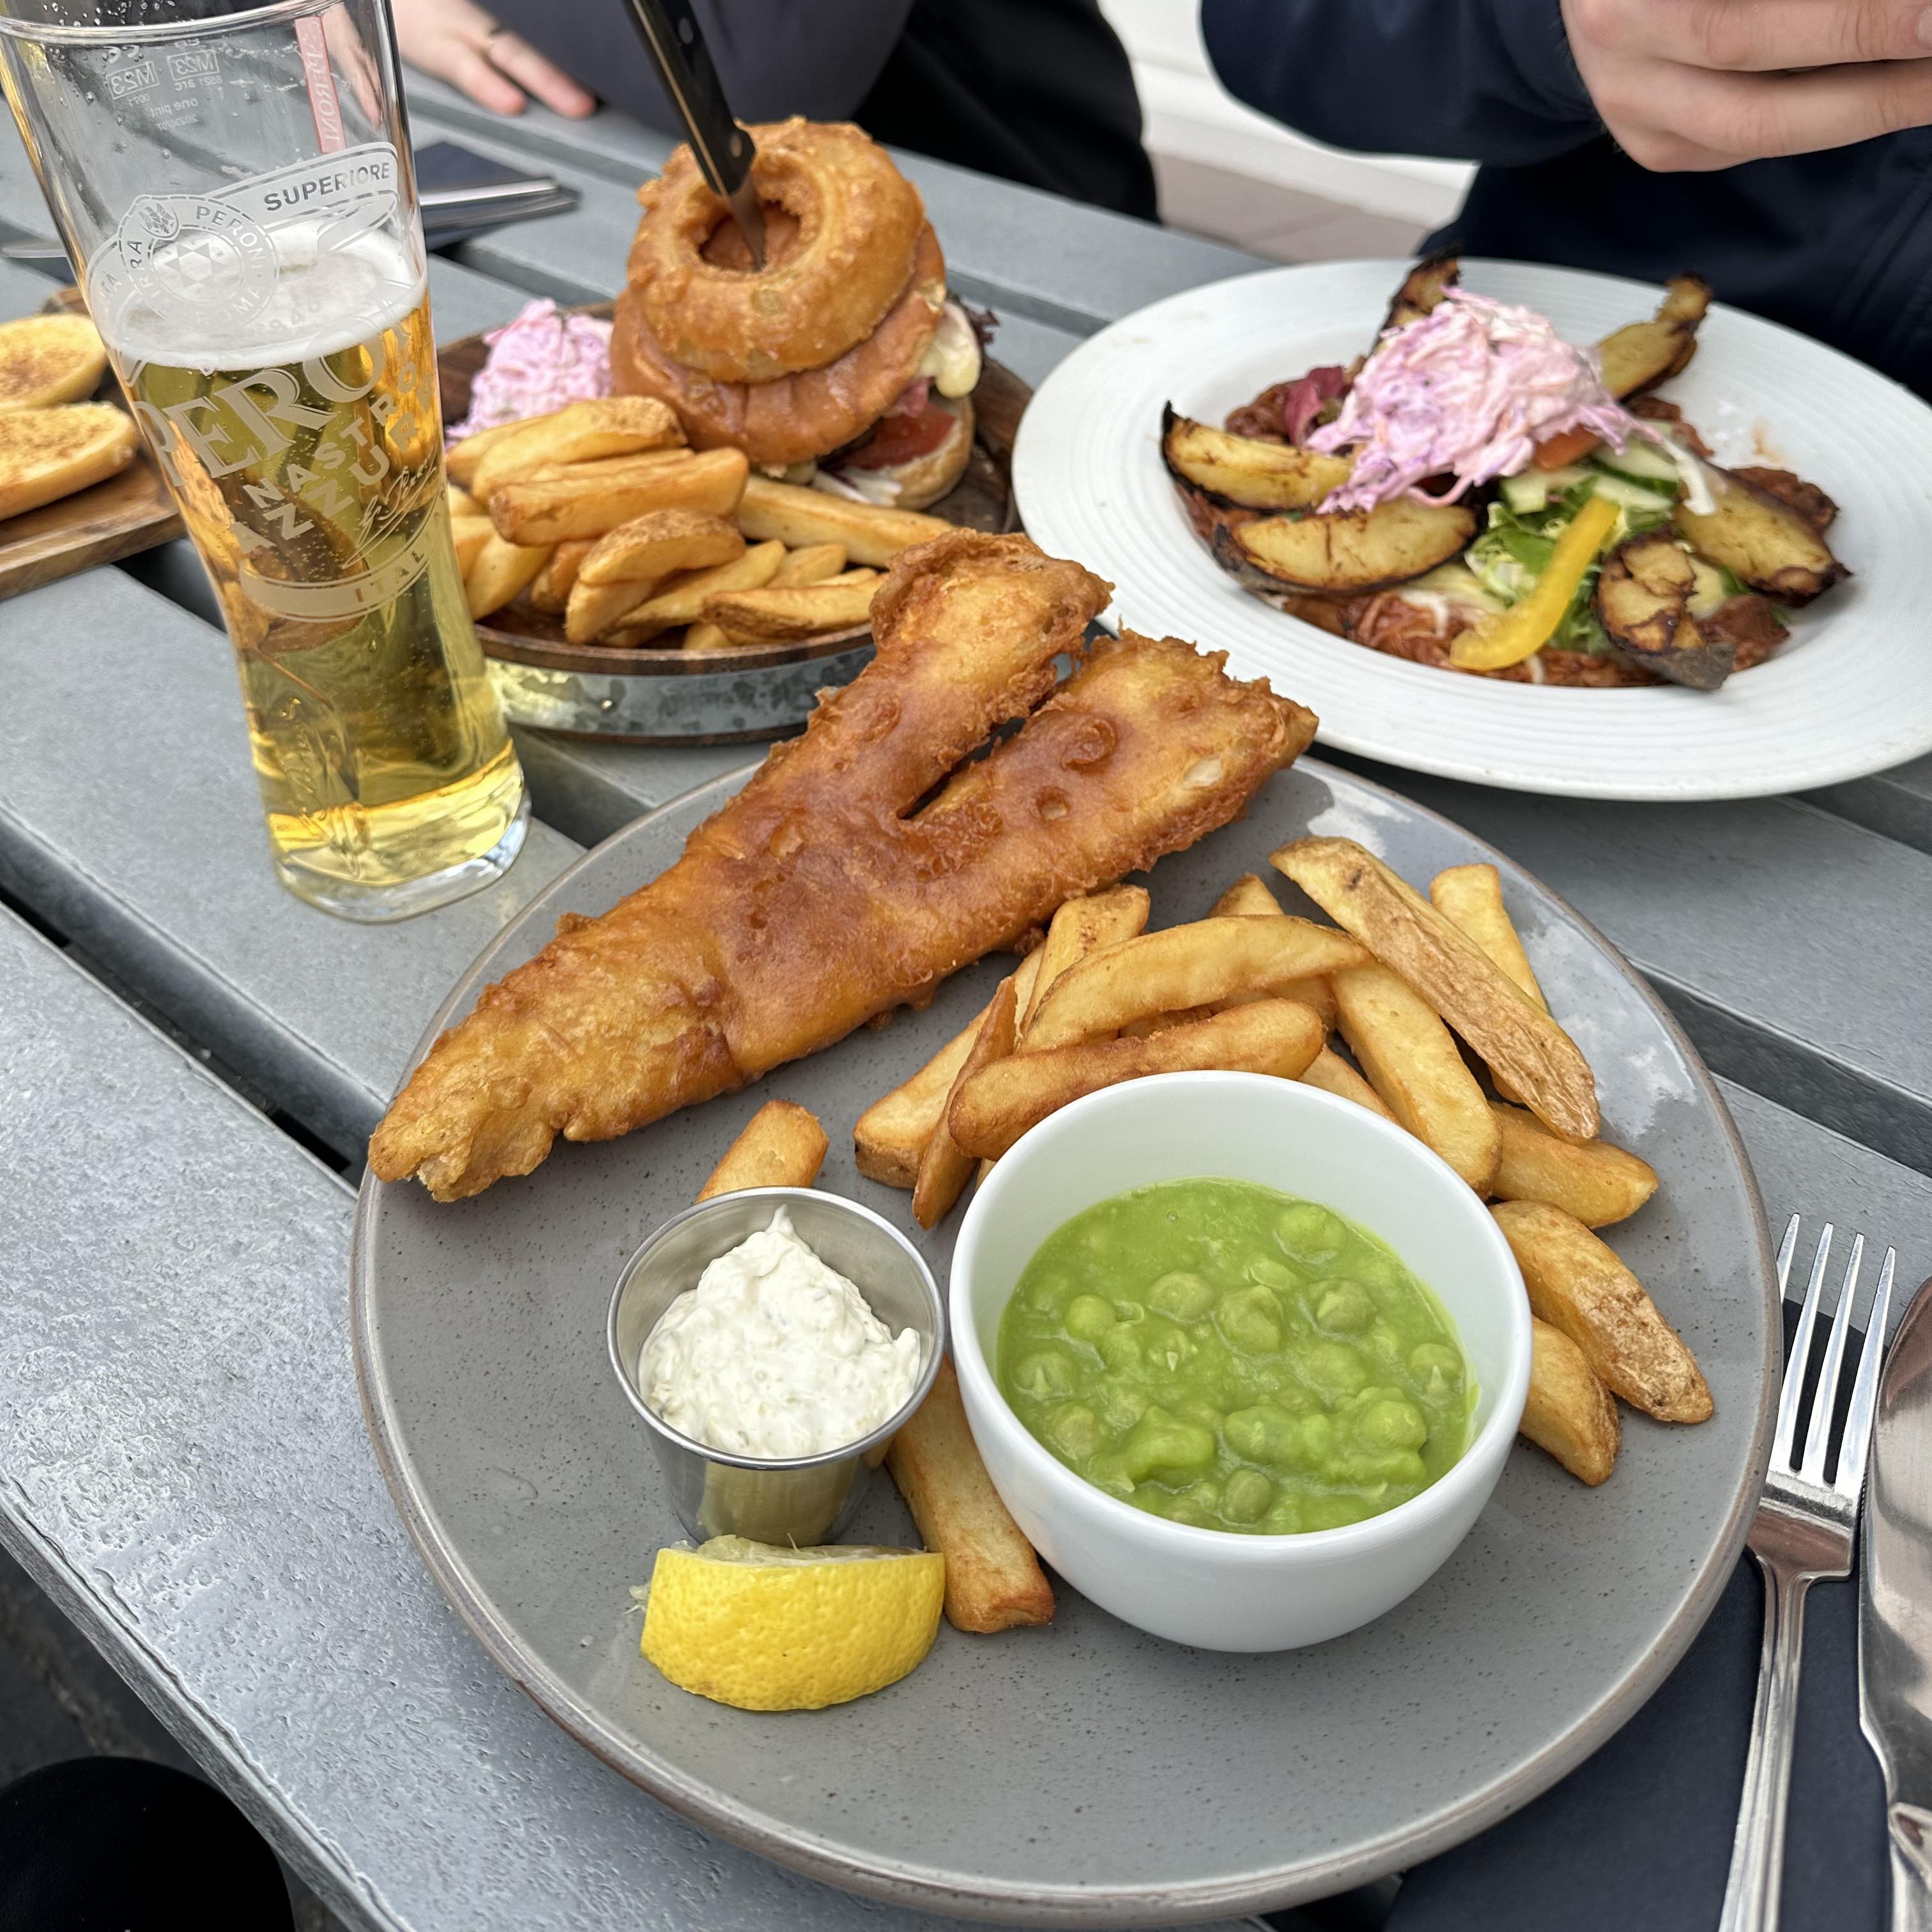 Fish and chips meal with mushy peas and tartare sauce at The Bristol Trader